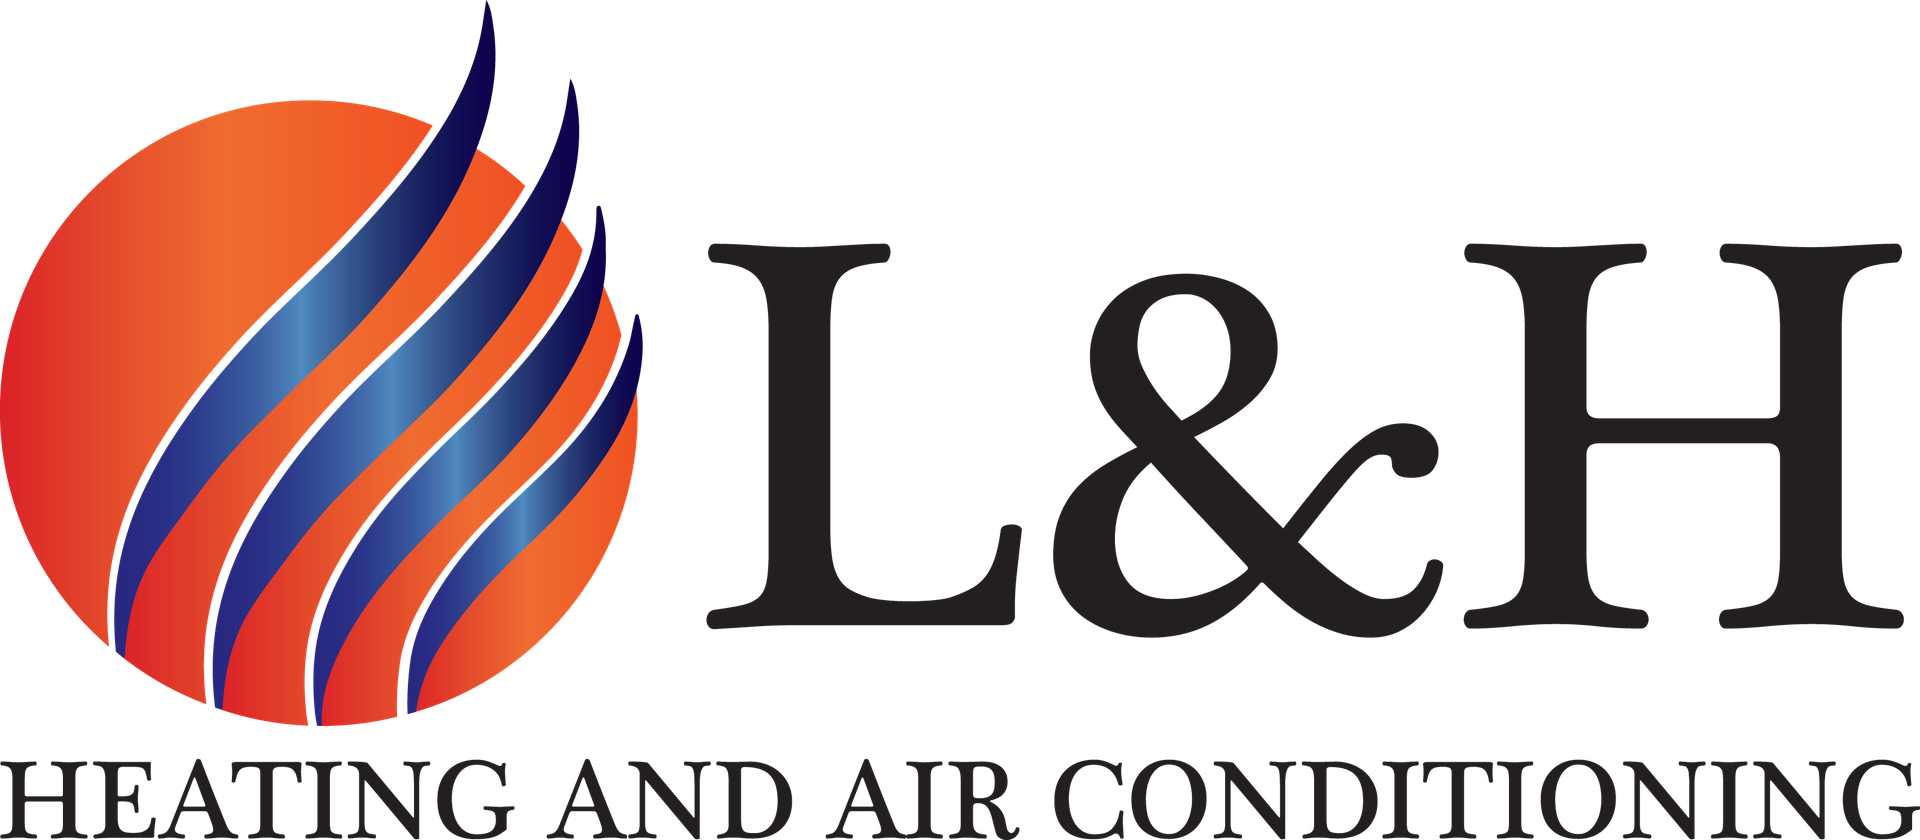 L&H Heating and Air Conditioning